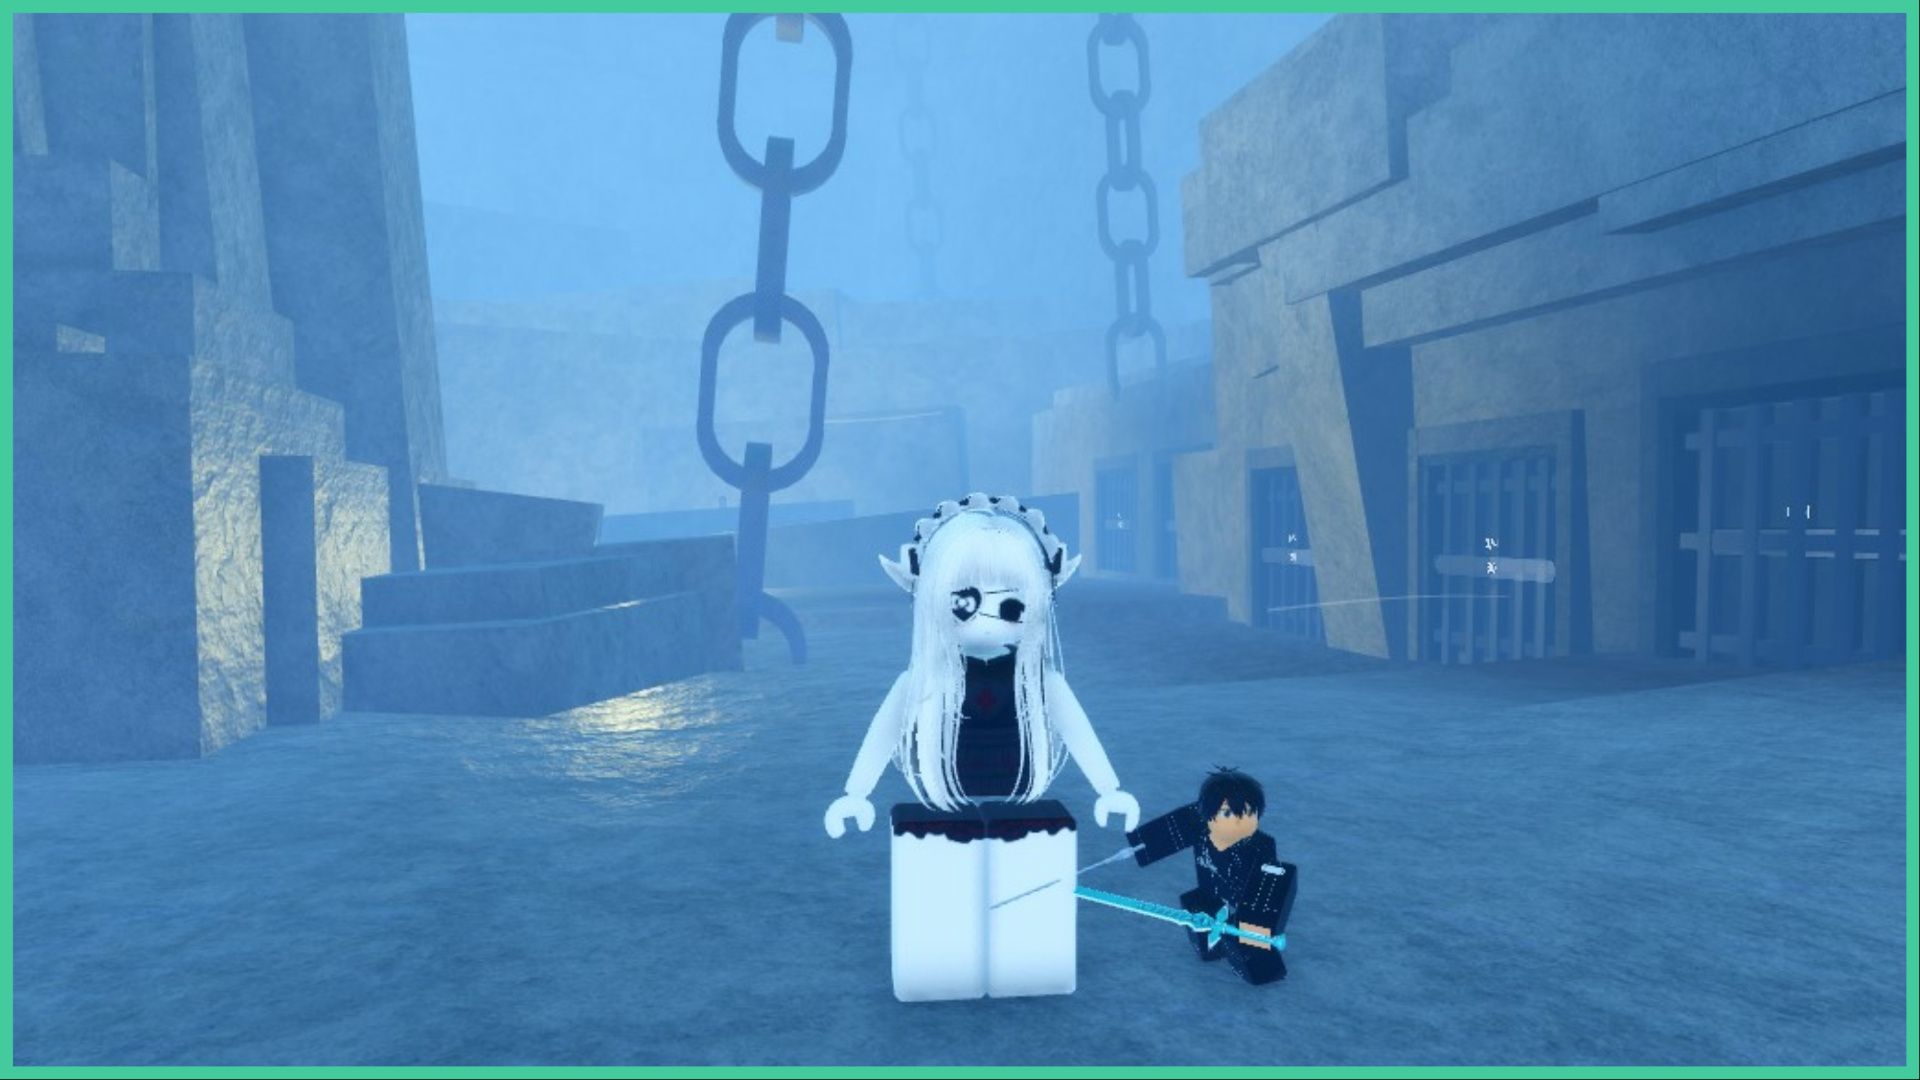 feature image for our anime last stand mythic tier list, the image features a screenshot from the game of a roblox player with a small version of kirito from sword art online next to them as they stand in what looks to be a cave dungeon, with metal bars that seems like prison cells and large metal chains attached from the ground up